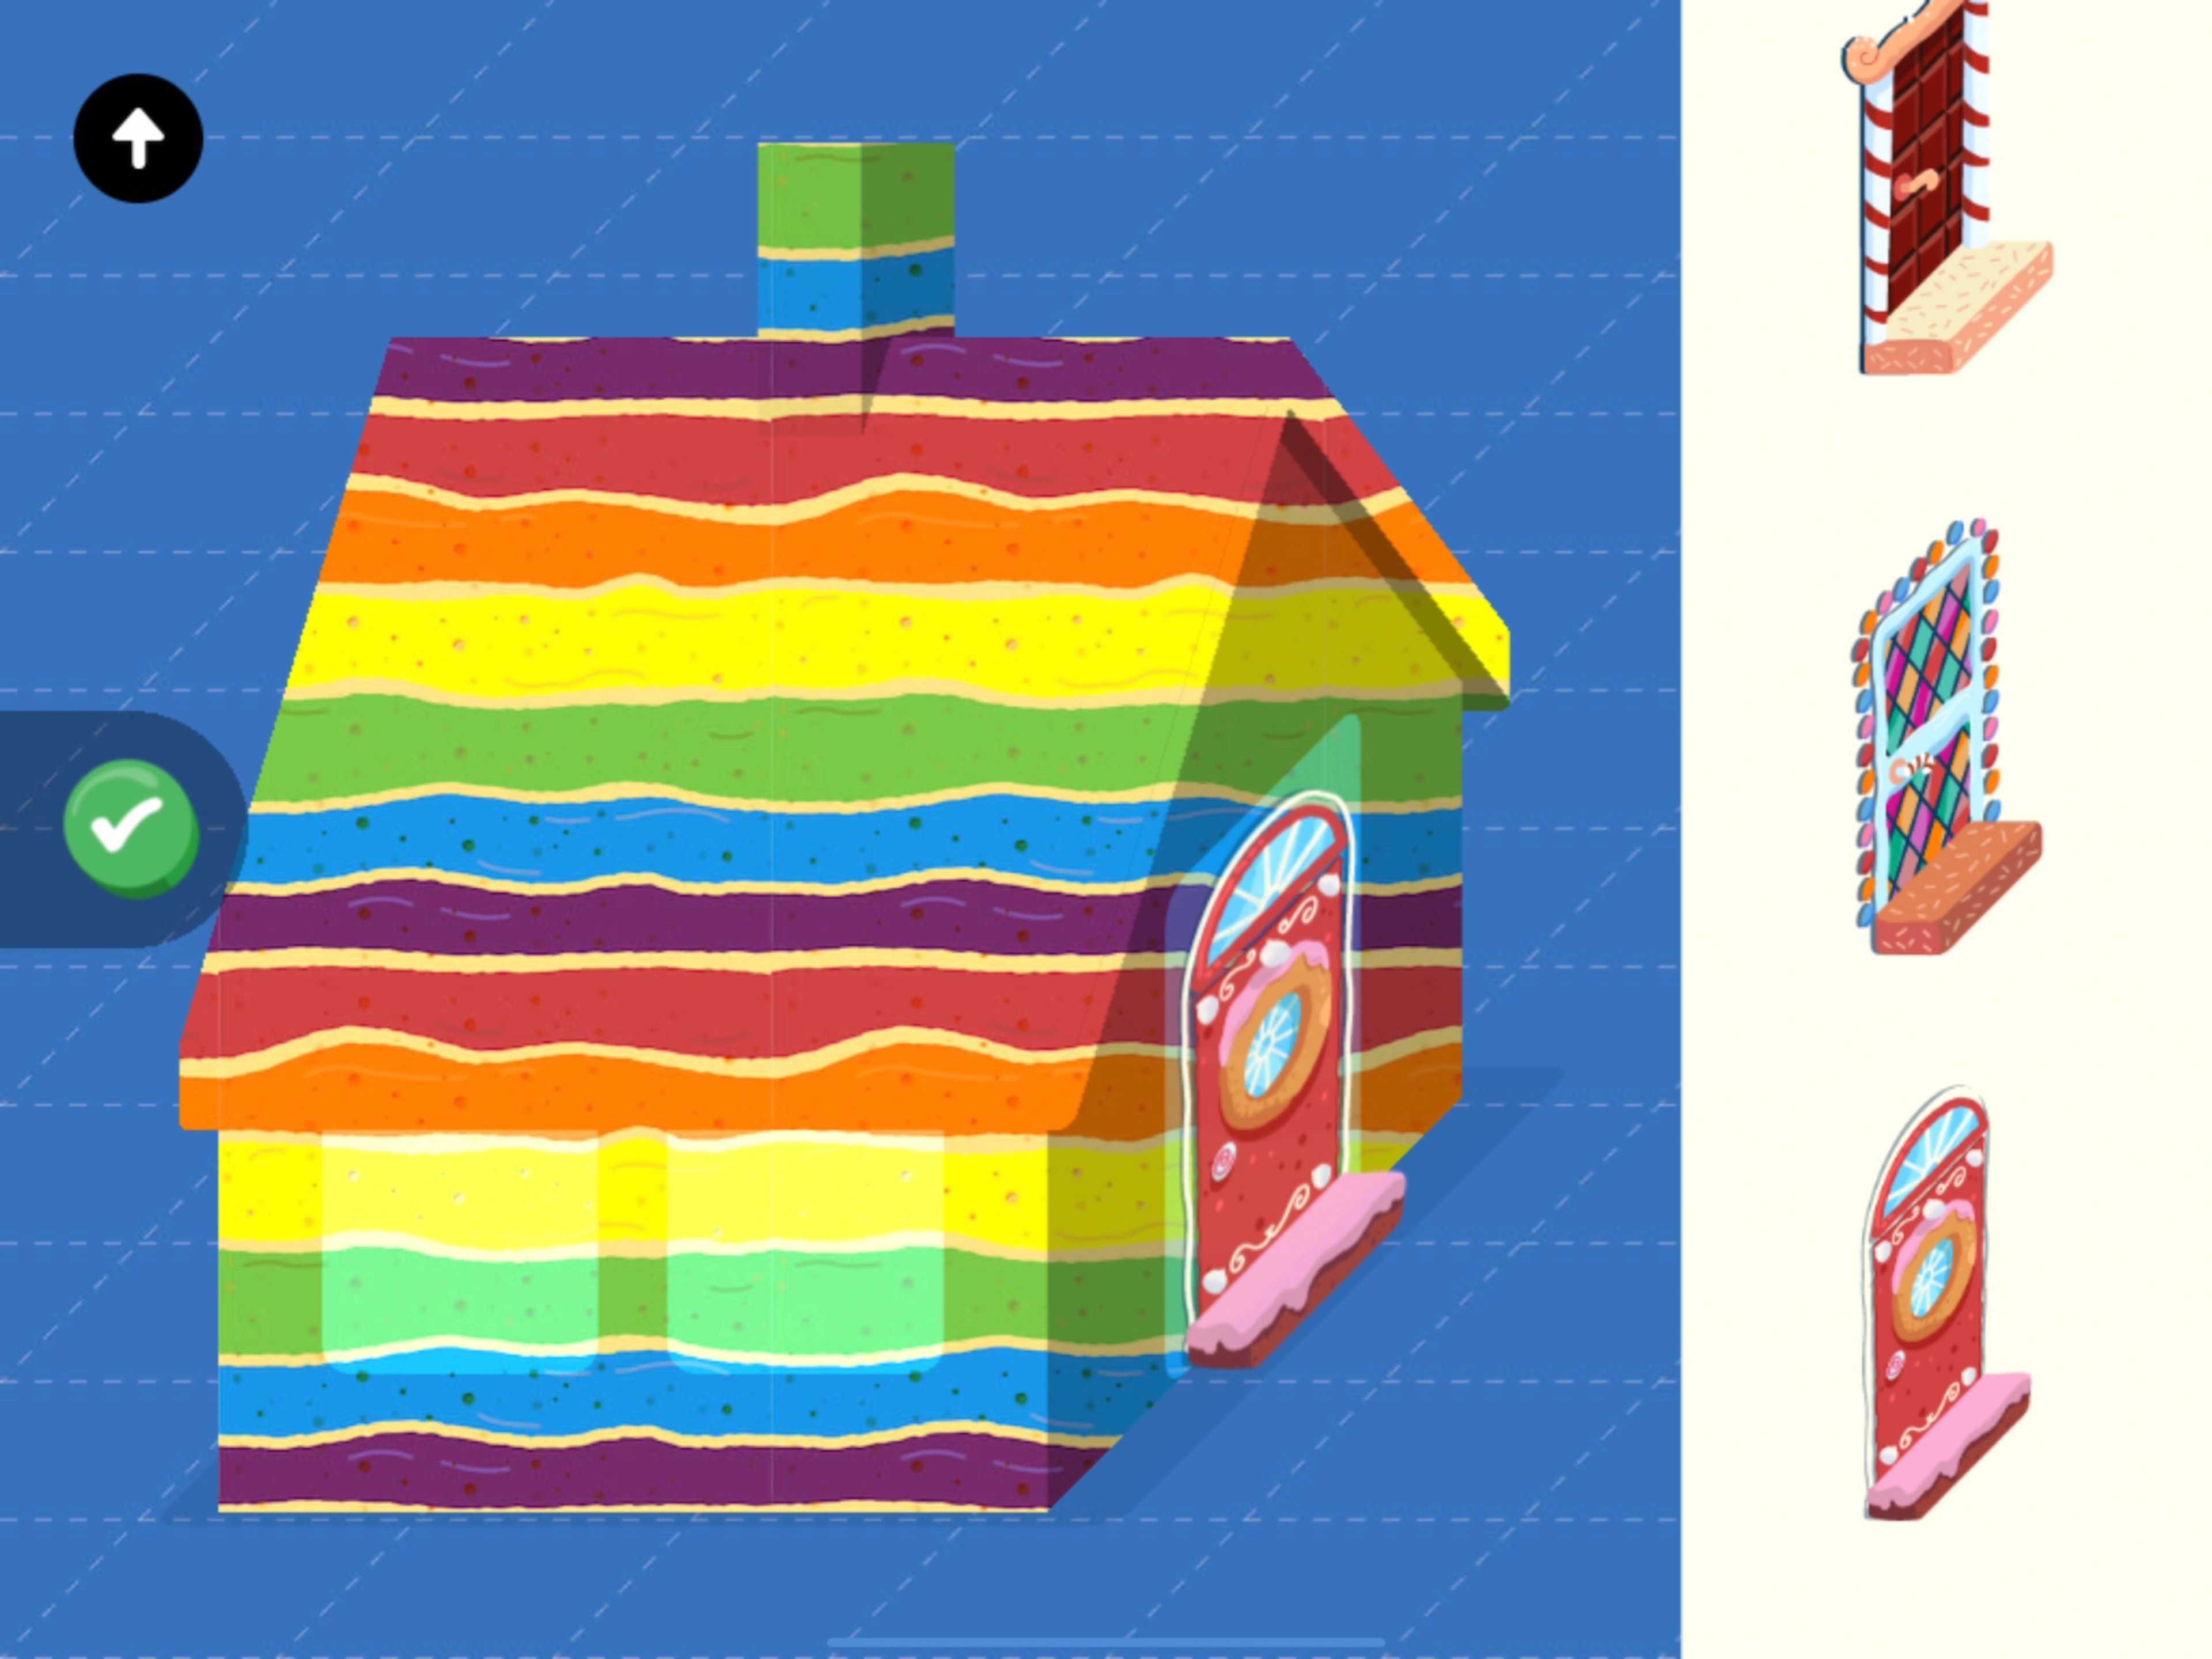 House building section from the game Rosas Nabolag